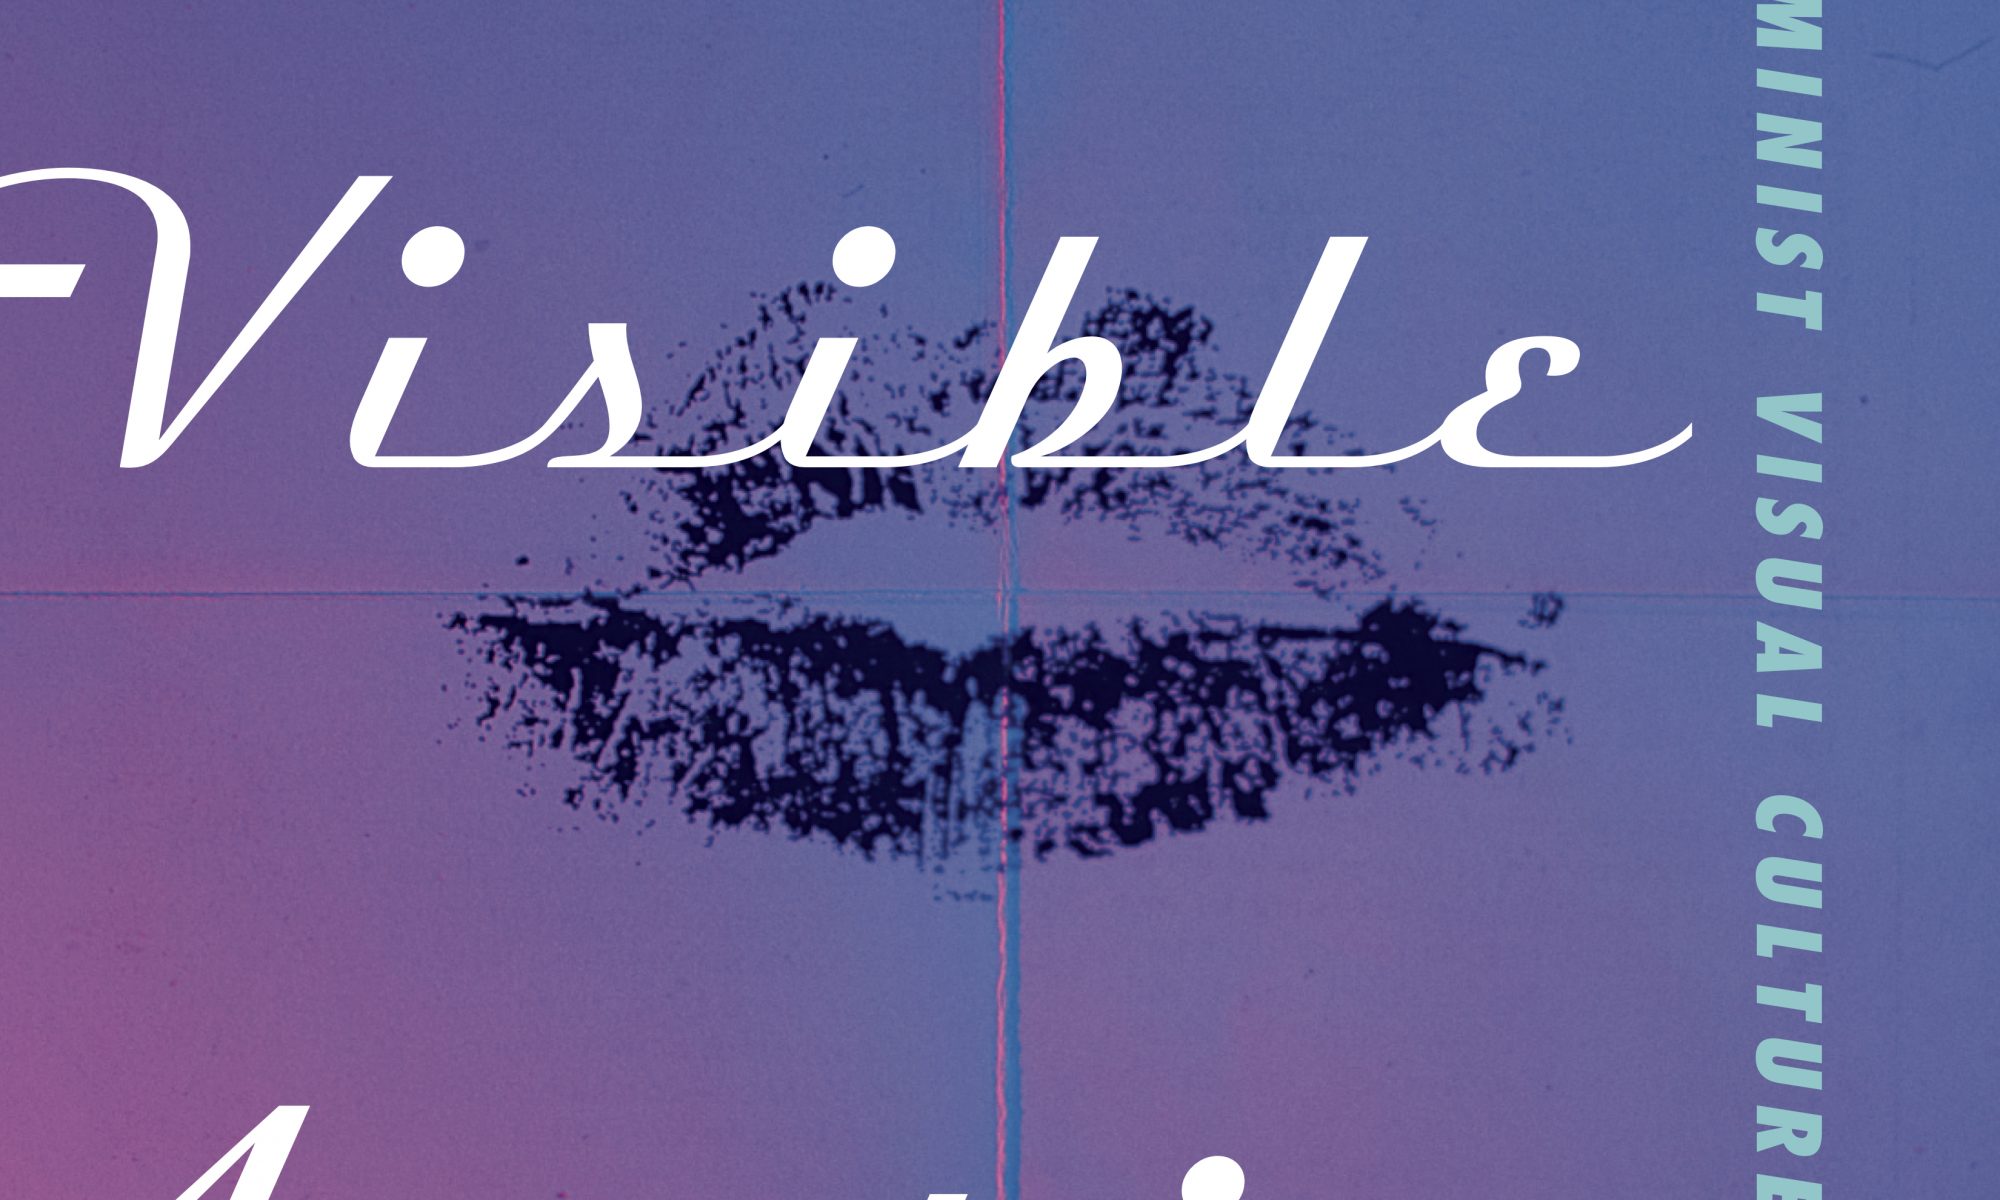 Cover image of In Visible Archives by Margaret Galvan